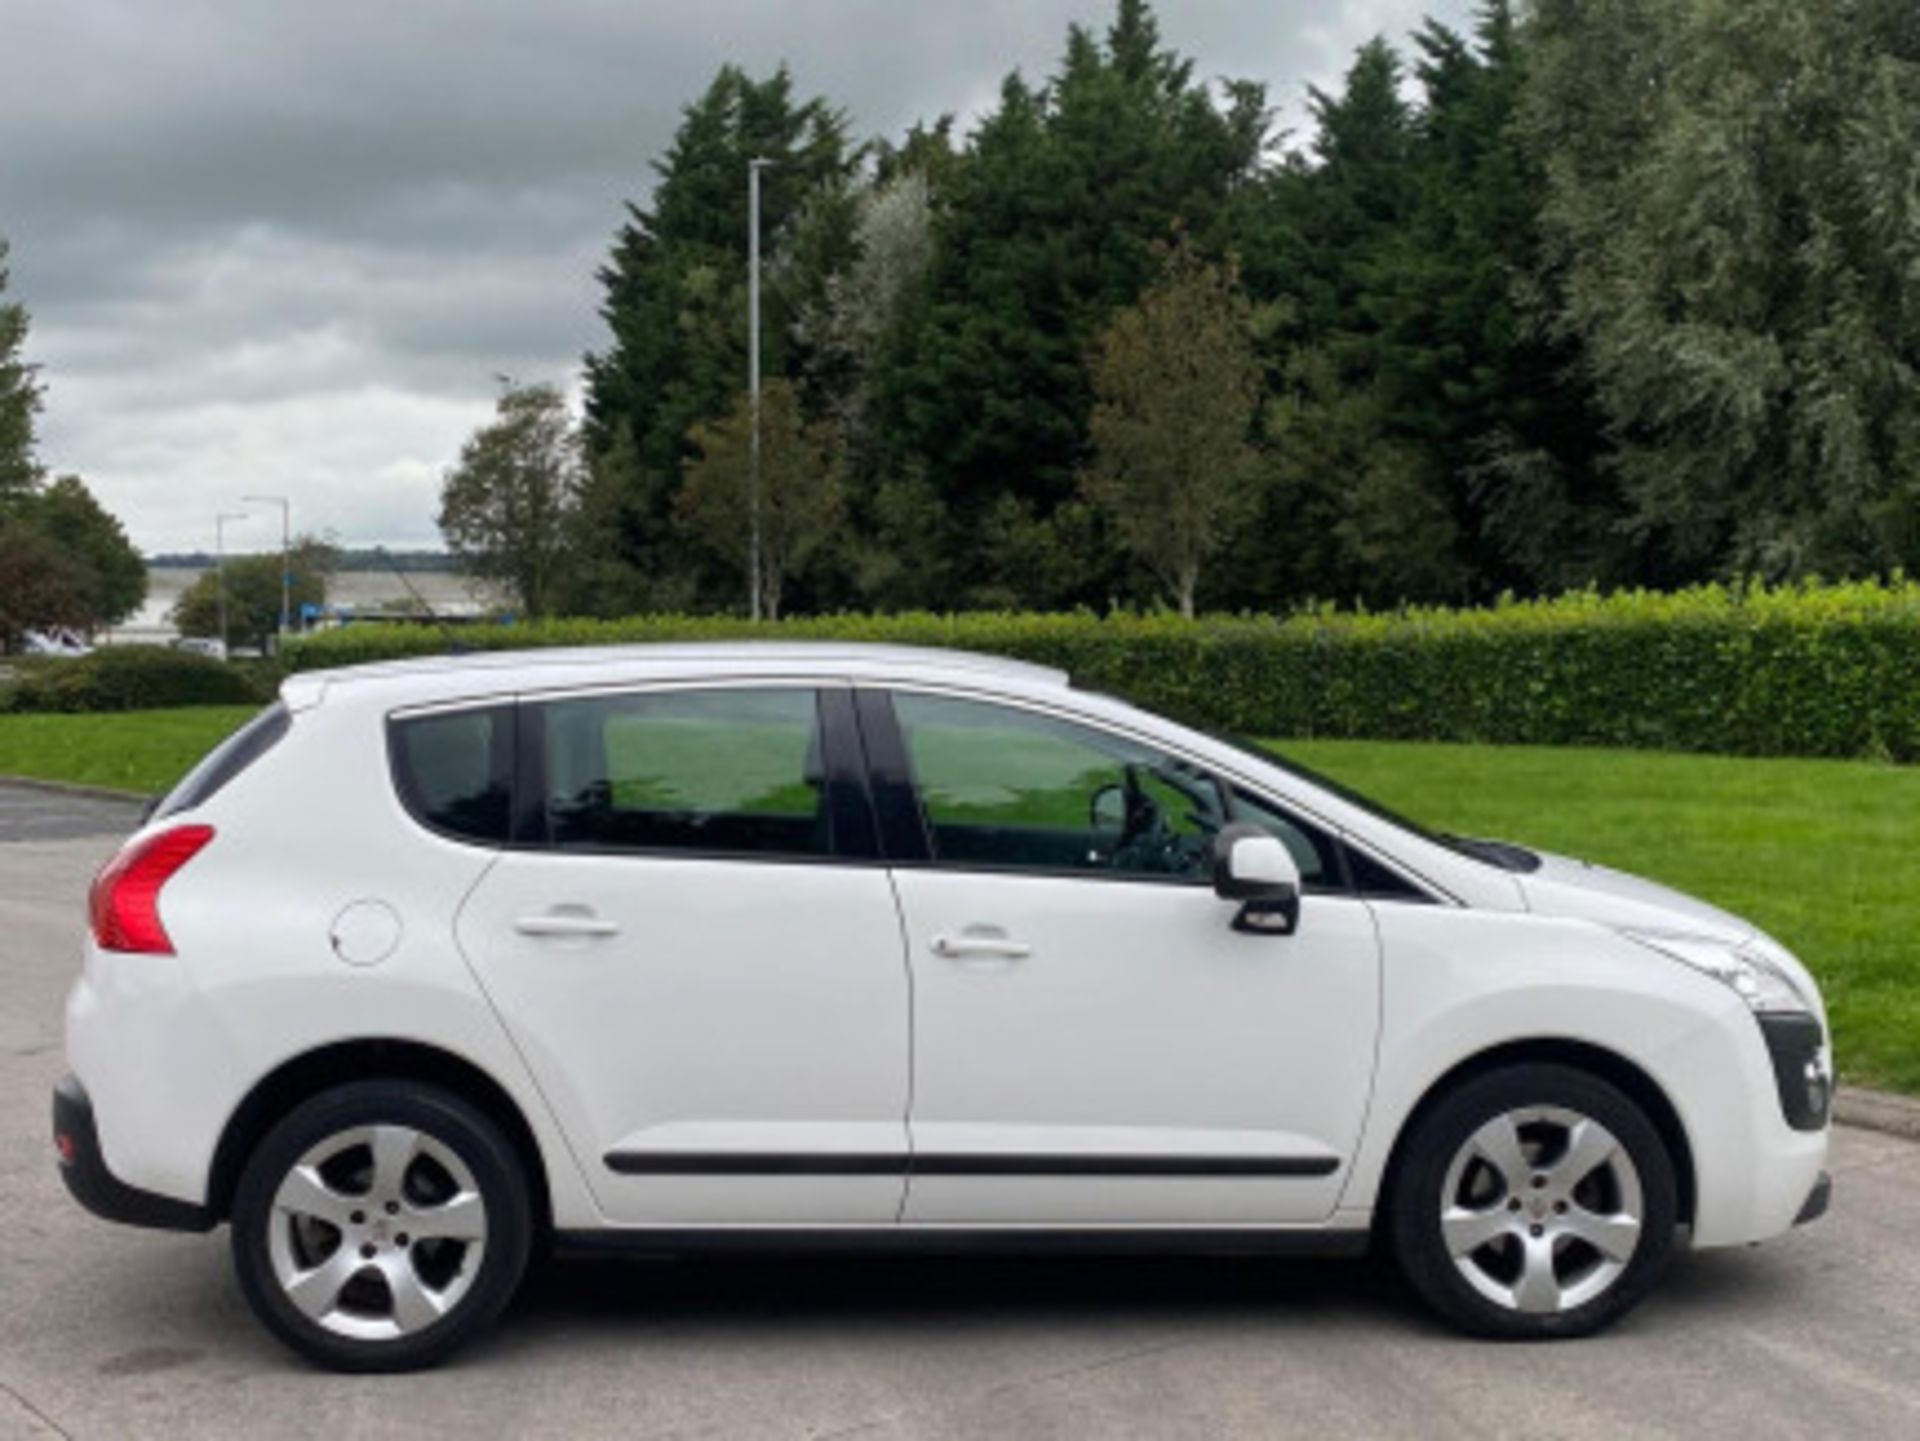 2013 PEUGEOT 3008 1.6 HDI ACTIVE EURO 5 5DR >>--NO VAT ON HAMMER--<< - Image 31 of 69